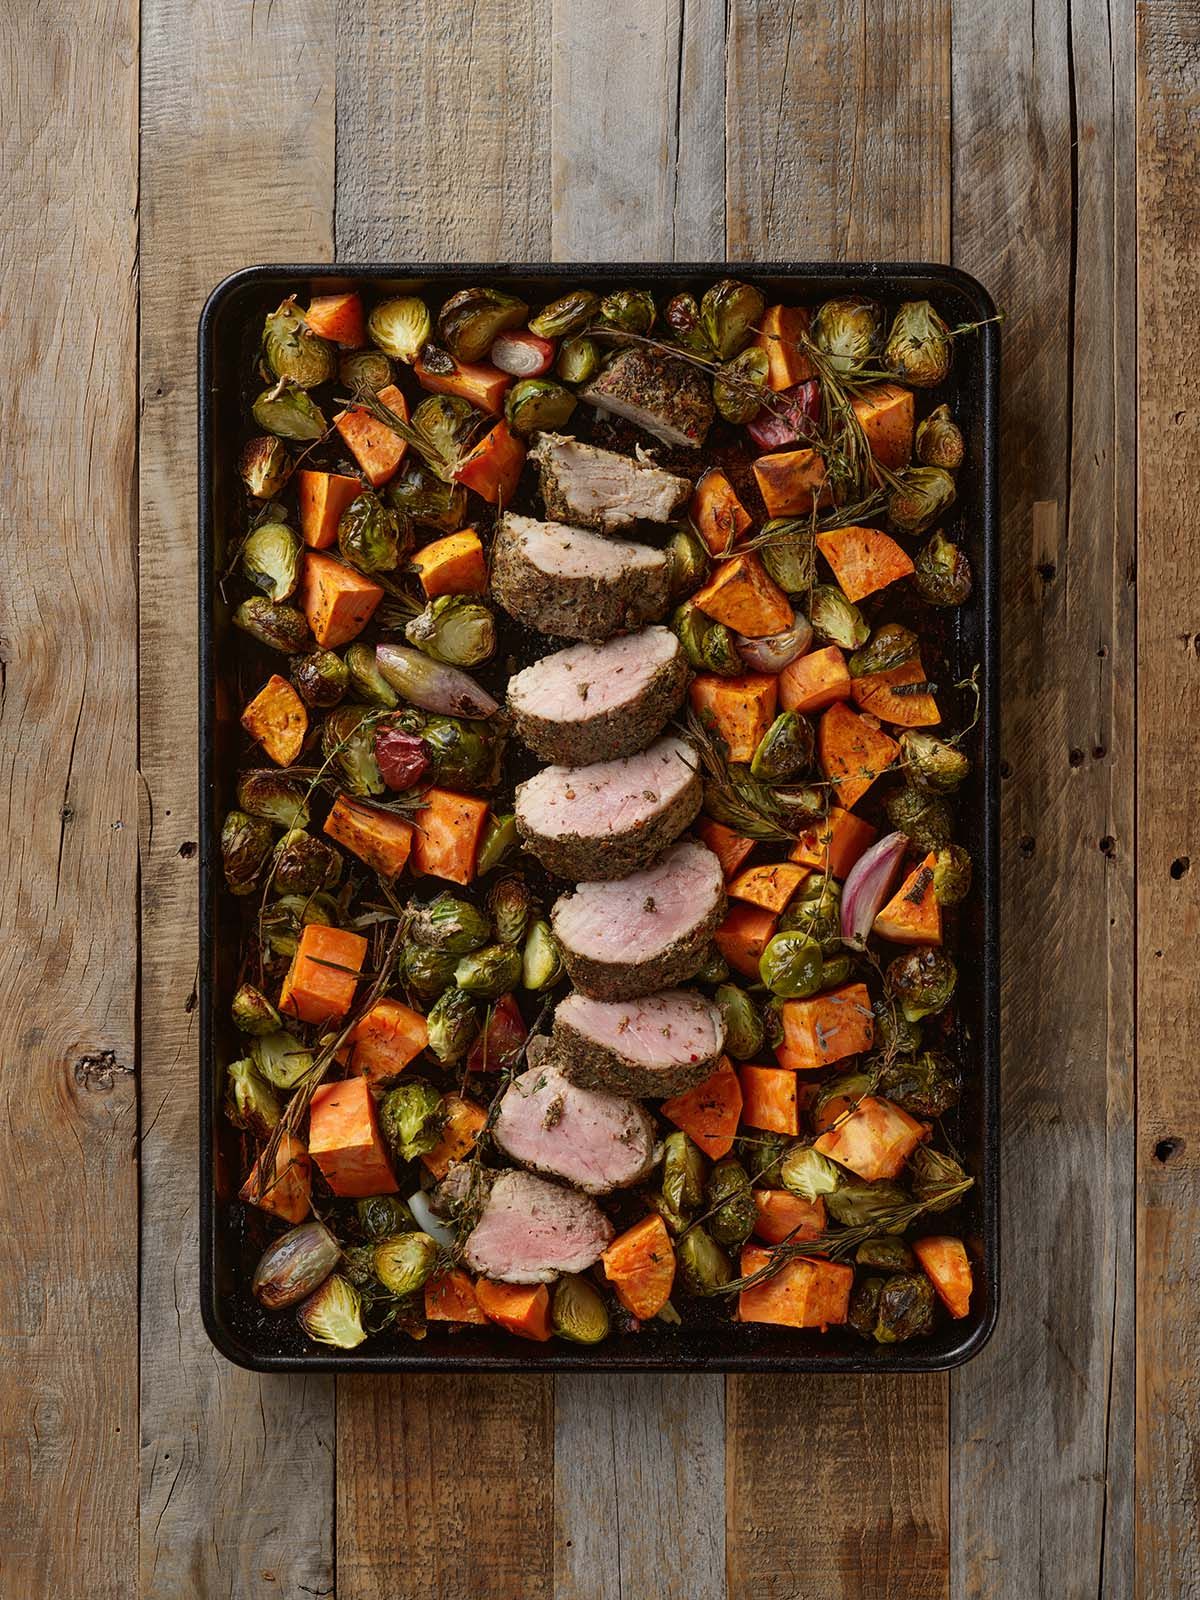 Sheet Pan Tenderloin with Fresh Herbs, Sweet Potatoes and Brussel Sprouts